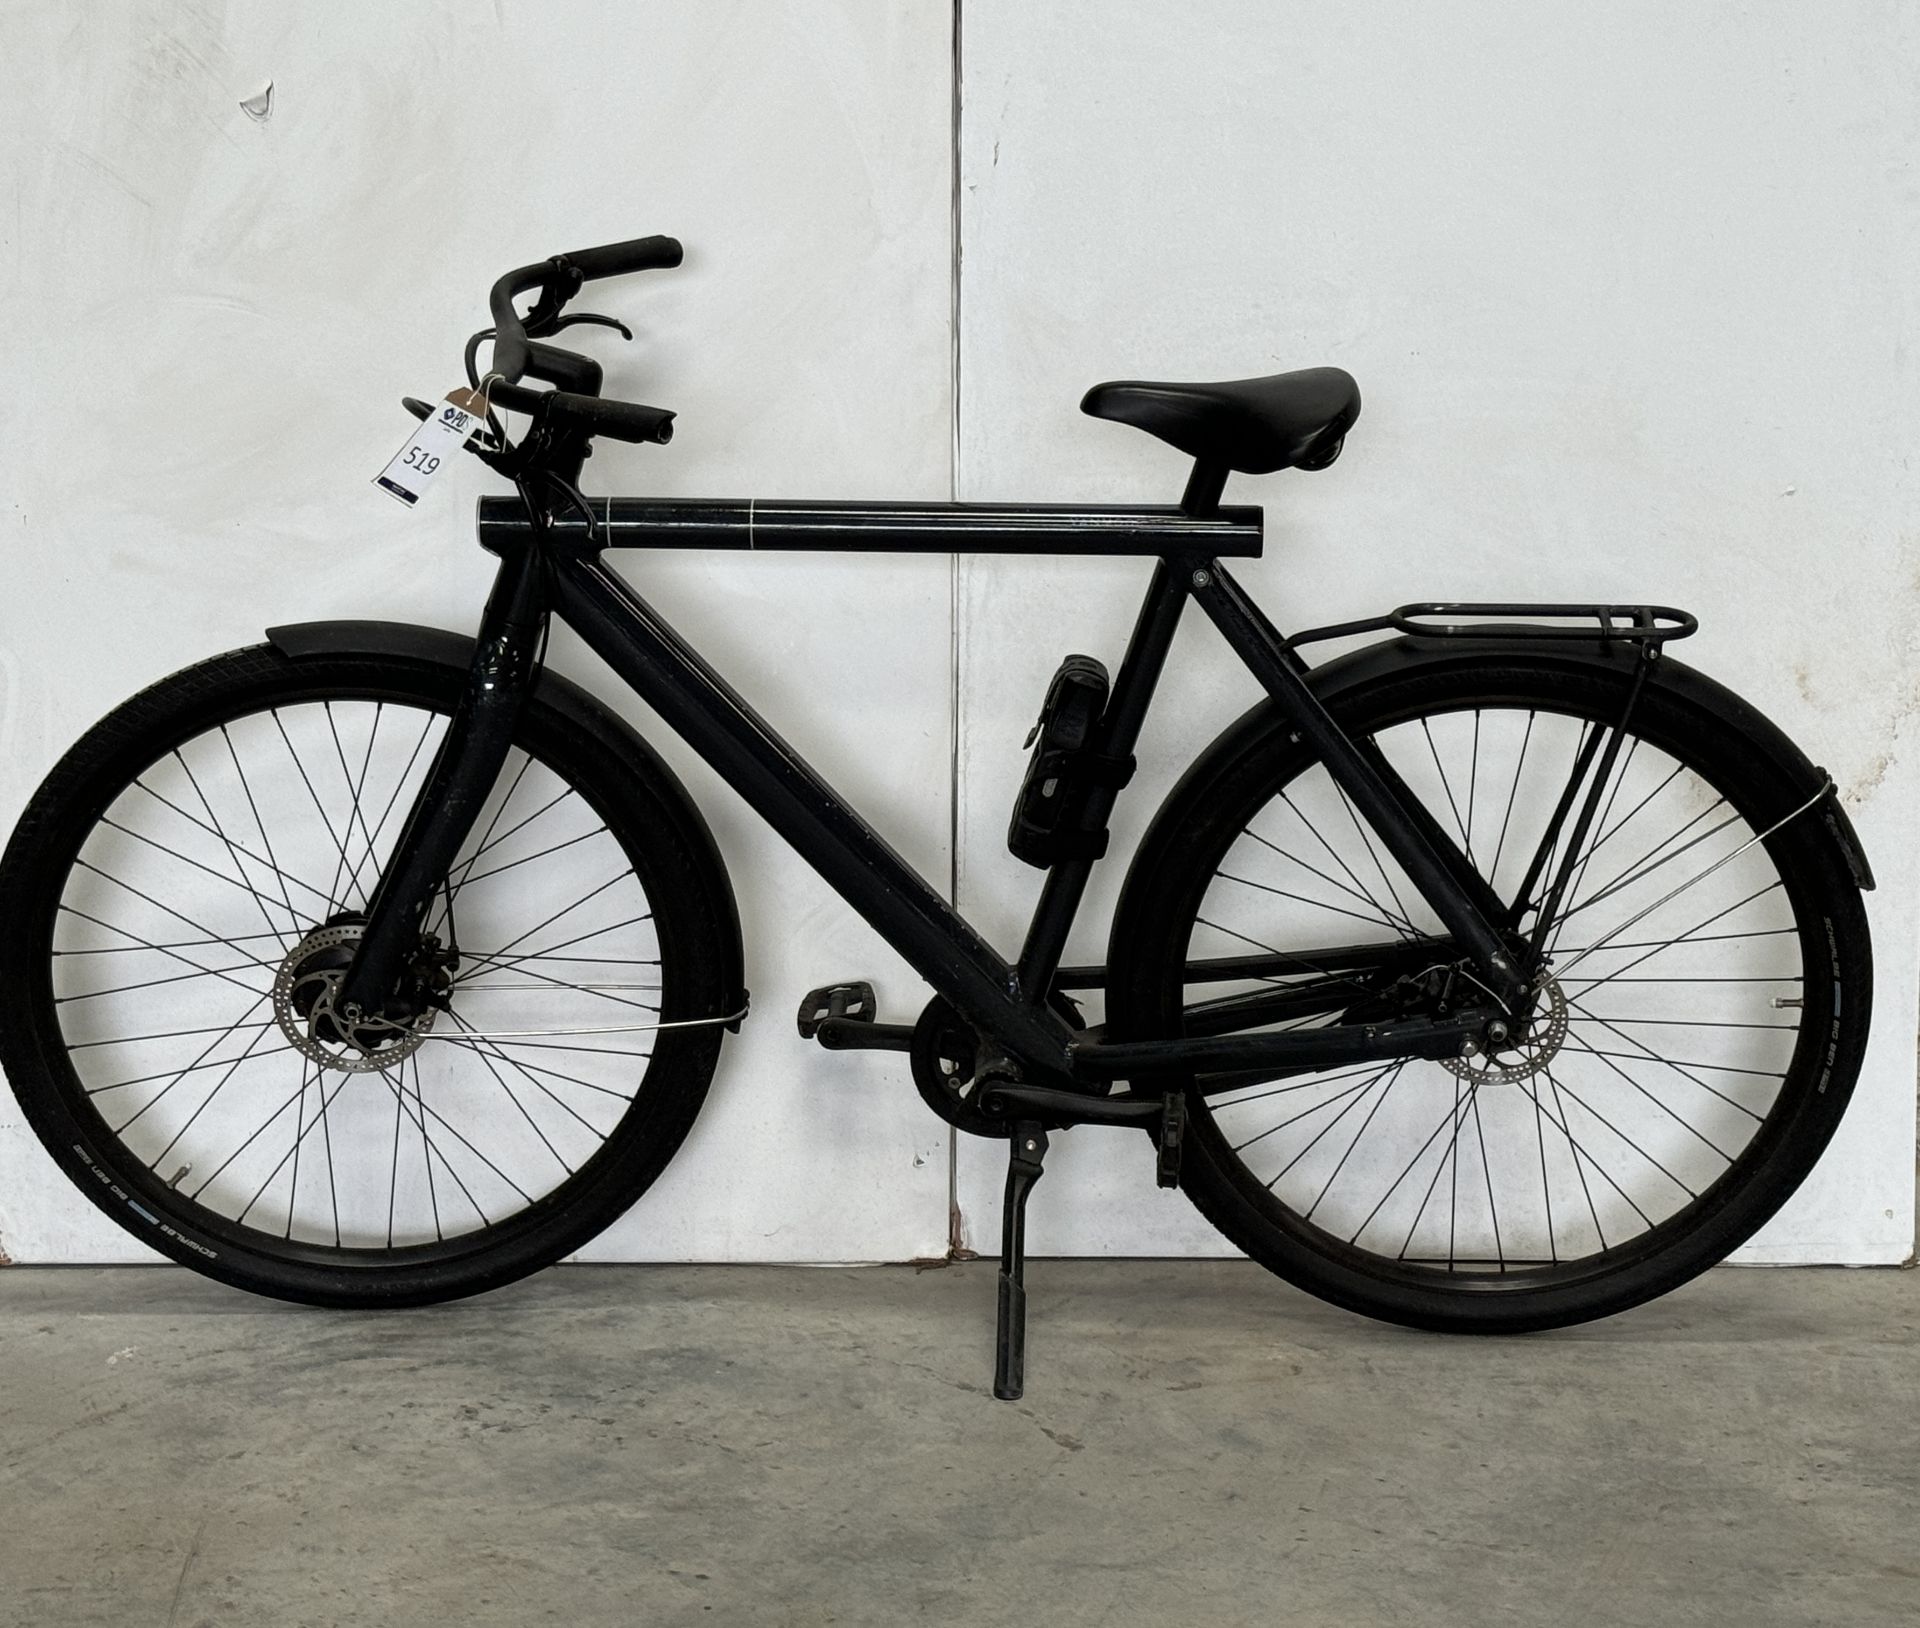 VanMoof Electric Bike, Frame Number AST8805690 (NOT ROADWORTHY - FOR SPARES ONLY) (No codes